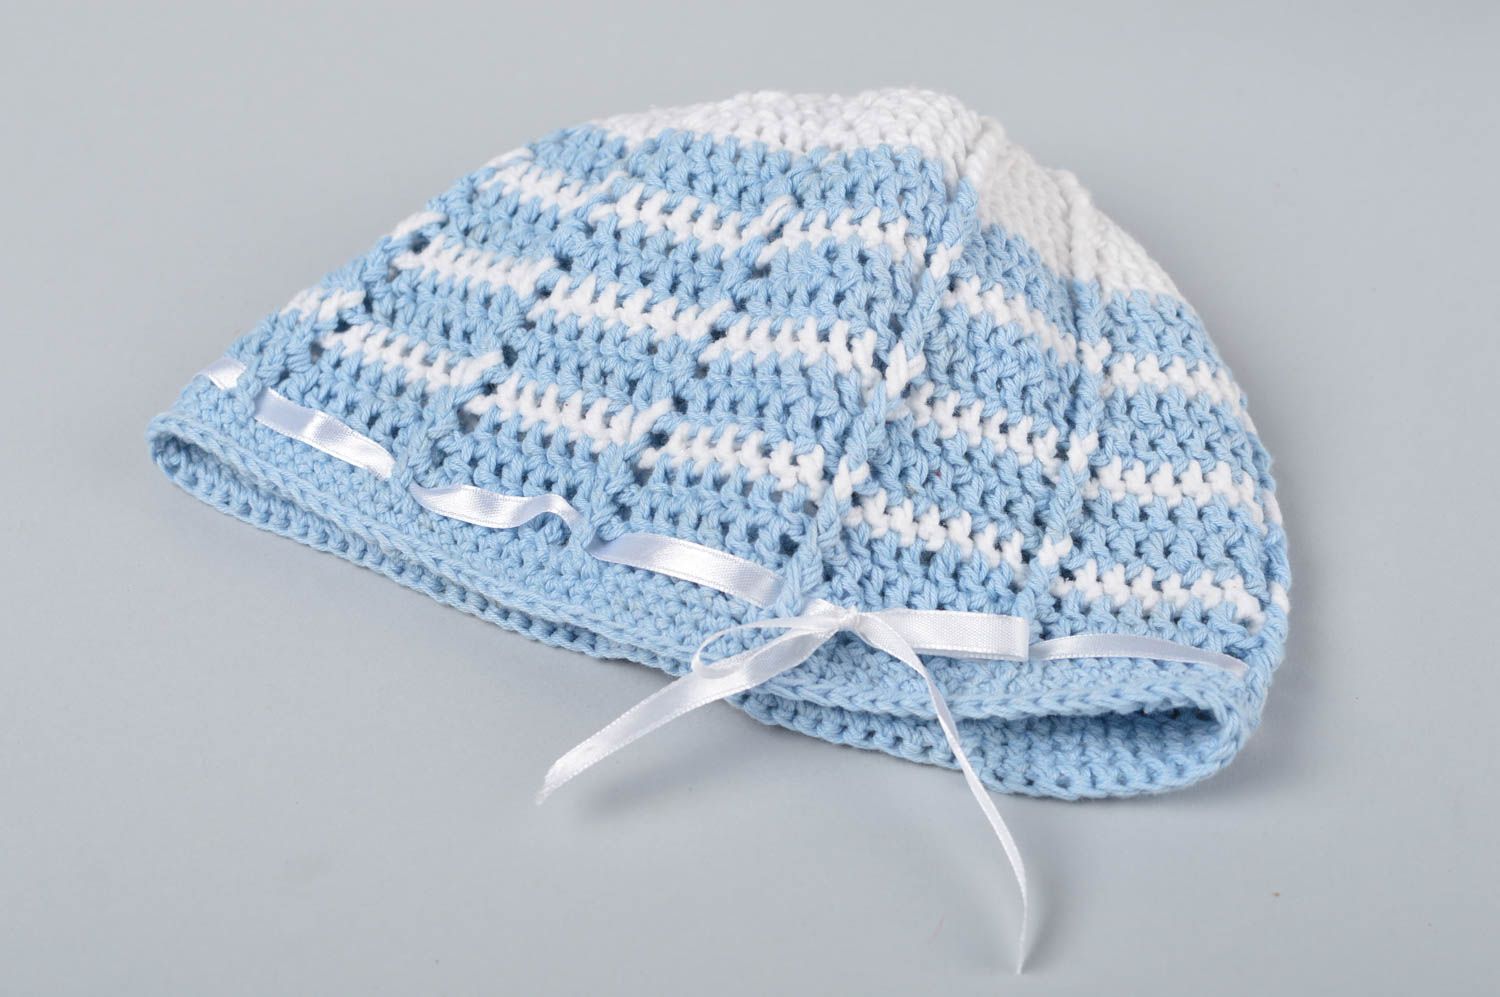 Handmade warm hat crochet hats for babies girls accessories gifts for kids photo 2